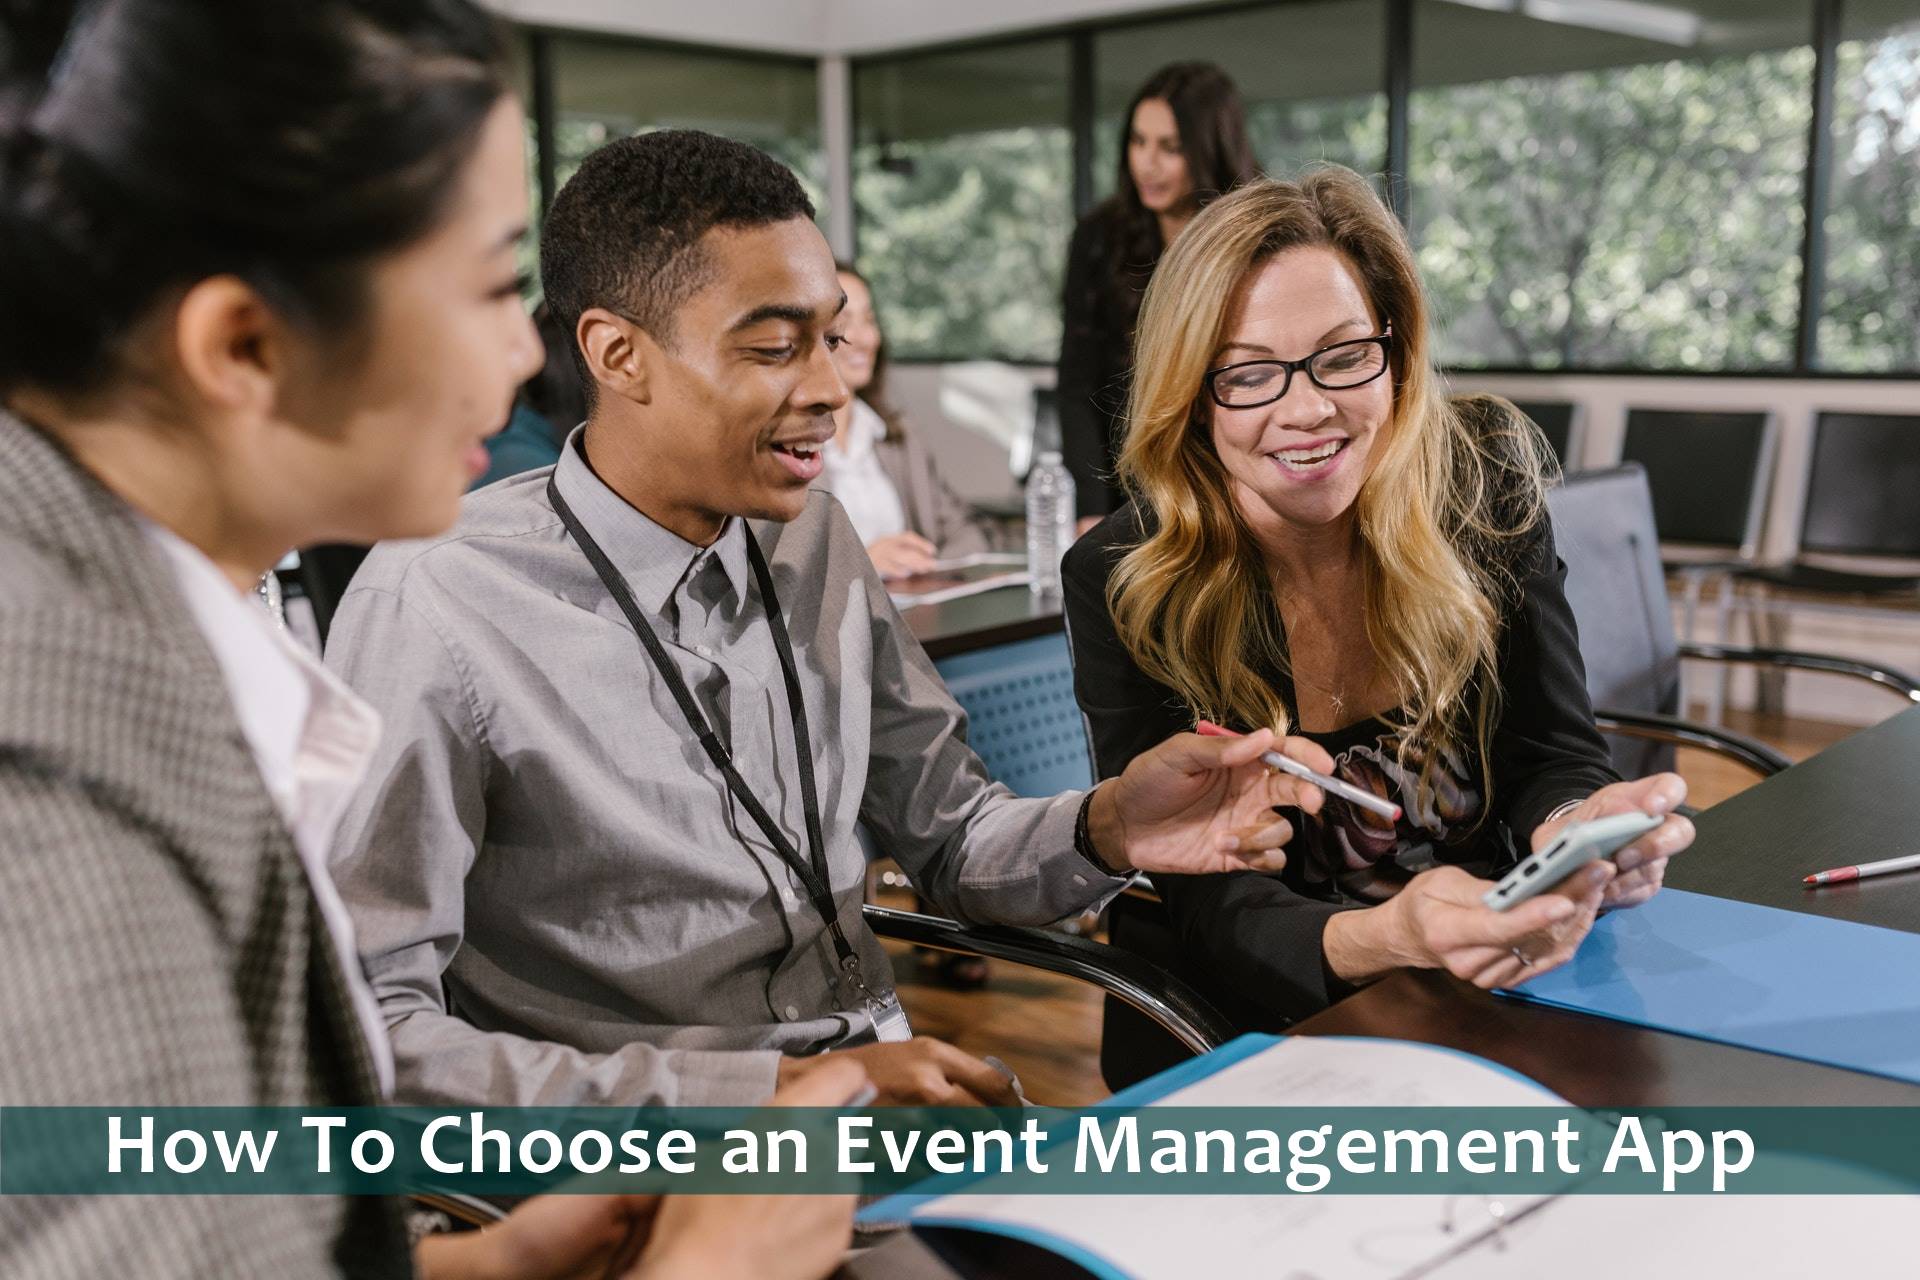 How To Choose an Event Management App